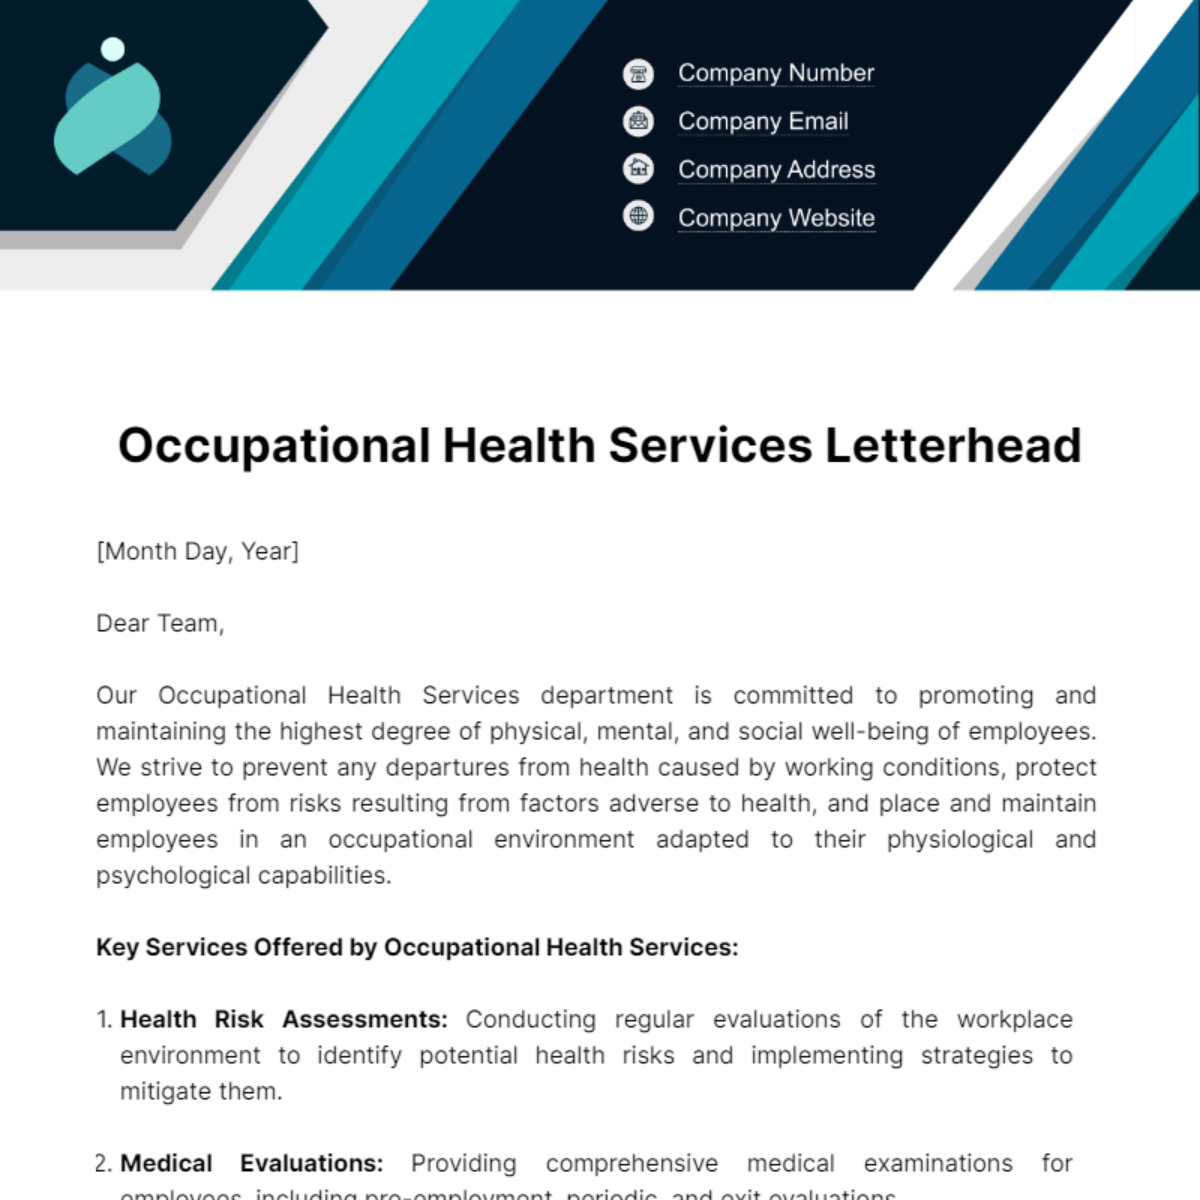 Occupational Health Services Letterhead Template